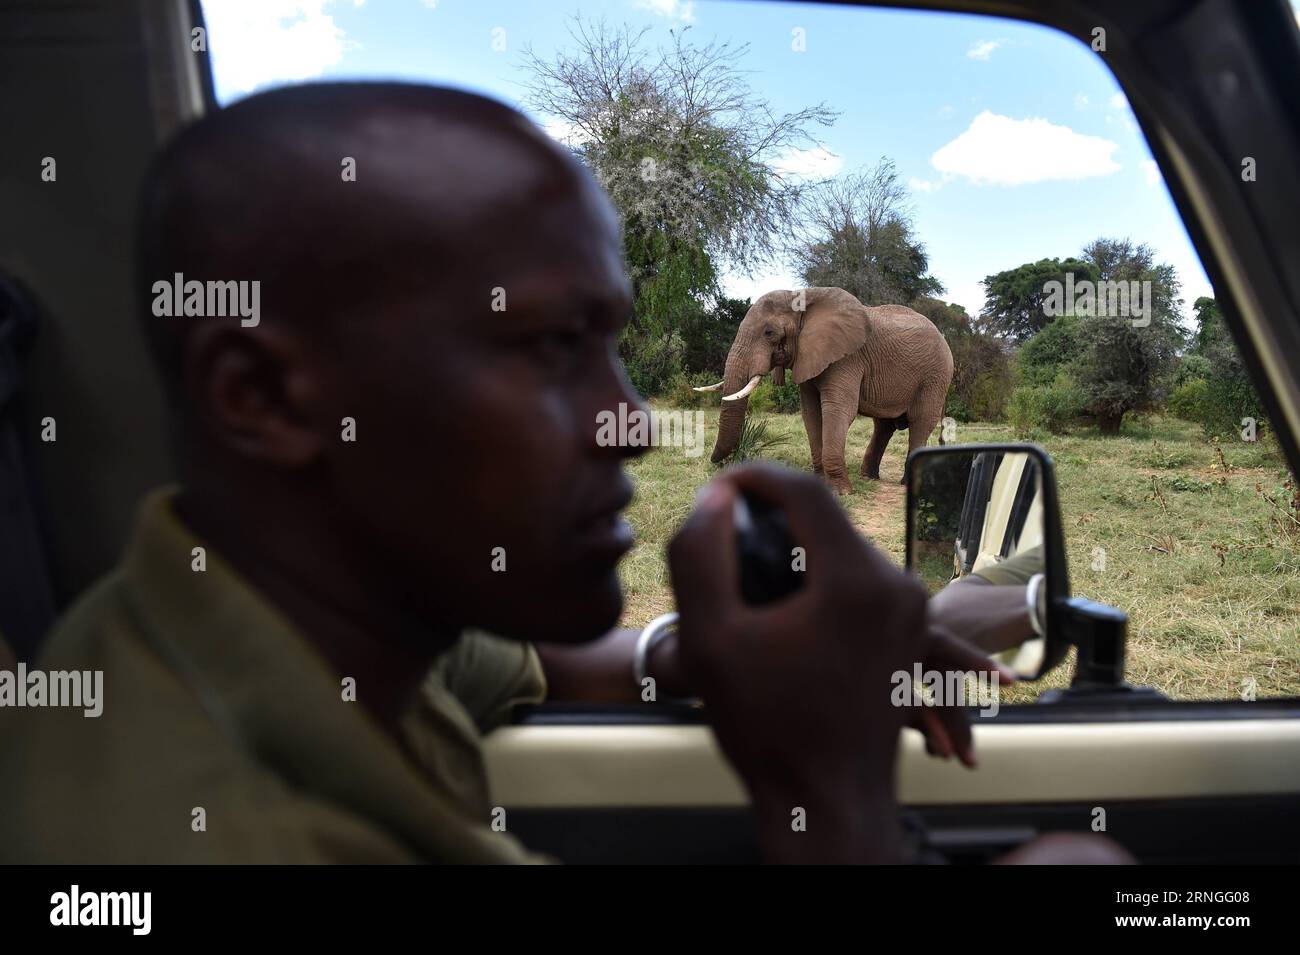 (160927) -- SAMBURU, Sept. 27, 2016 -- This file photo taken on March 1, 2016 shows David from Save the Elephants reporting his observation of elephants at Samburu National Reserve, Kenya. Africa s overall elephant population has seen the worst declines in 25 years, mainly due to poaching over the past 10 years, according to the African Elephant Status Report launched by the International Union for Conservation of Nature and Natural Resources (IUCN) at the ongoing 17th meeting of the Conference of the Parties to the Convention on International Trade in Endangered Spices of Wild Fauna and Flora Stock Photo